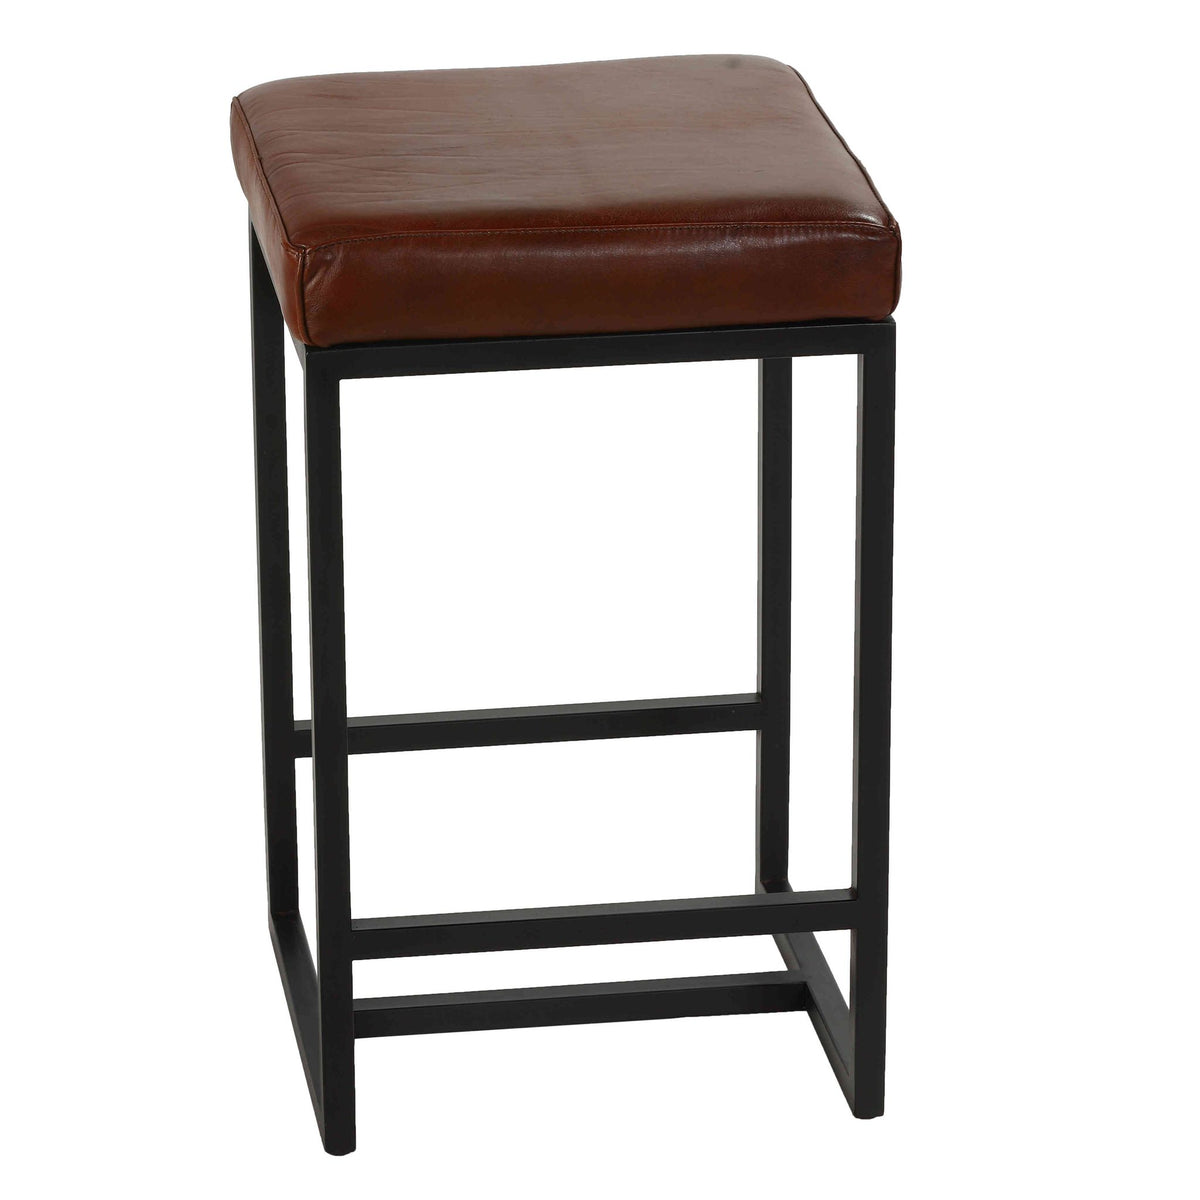 Bare Decor Cognac Backless Counter Stool in Genuine 100% Leather, Brown